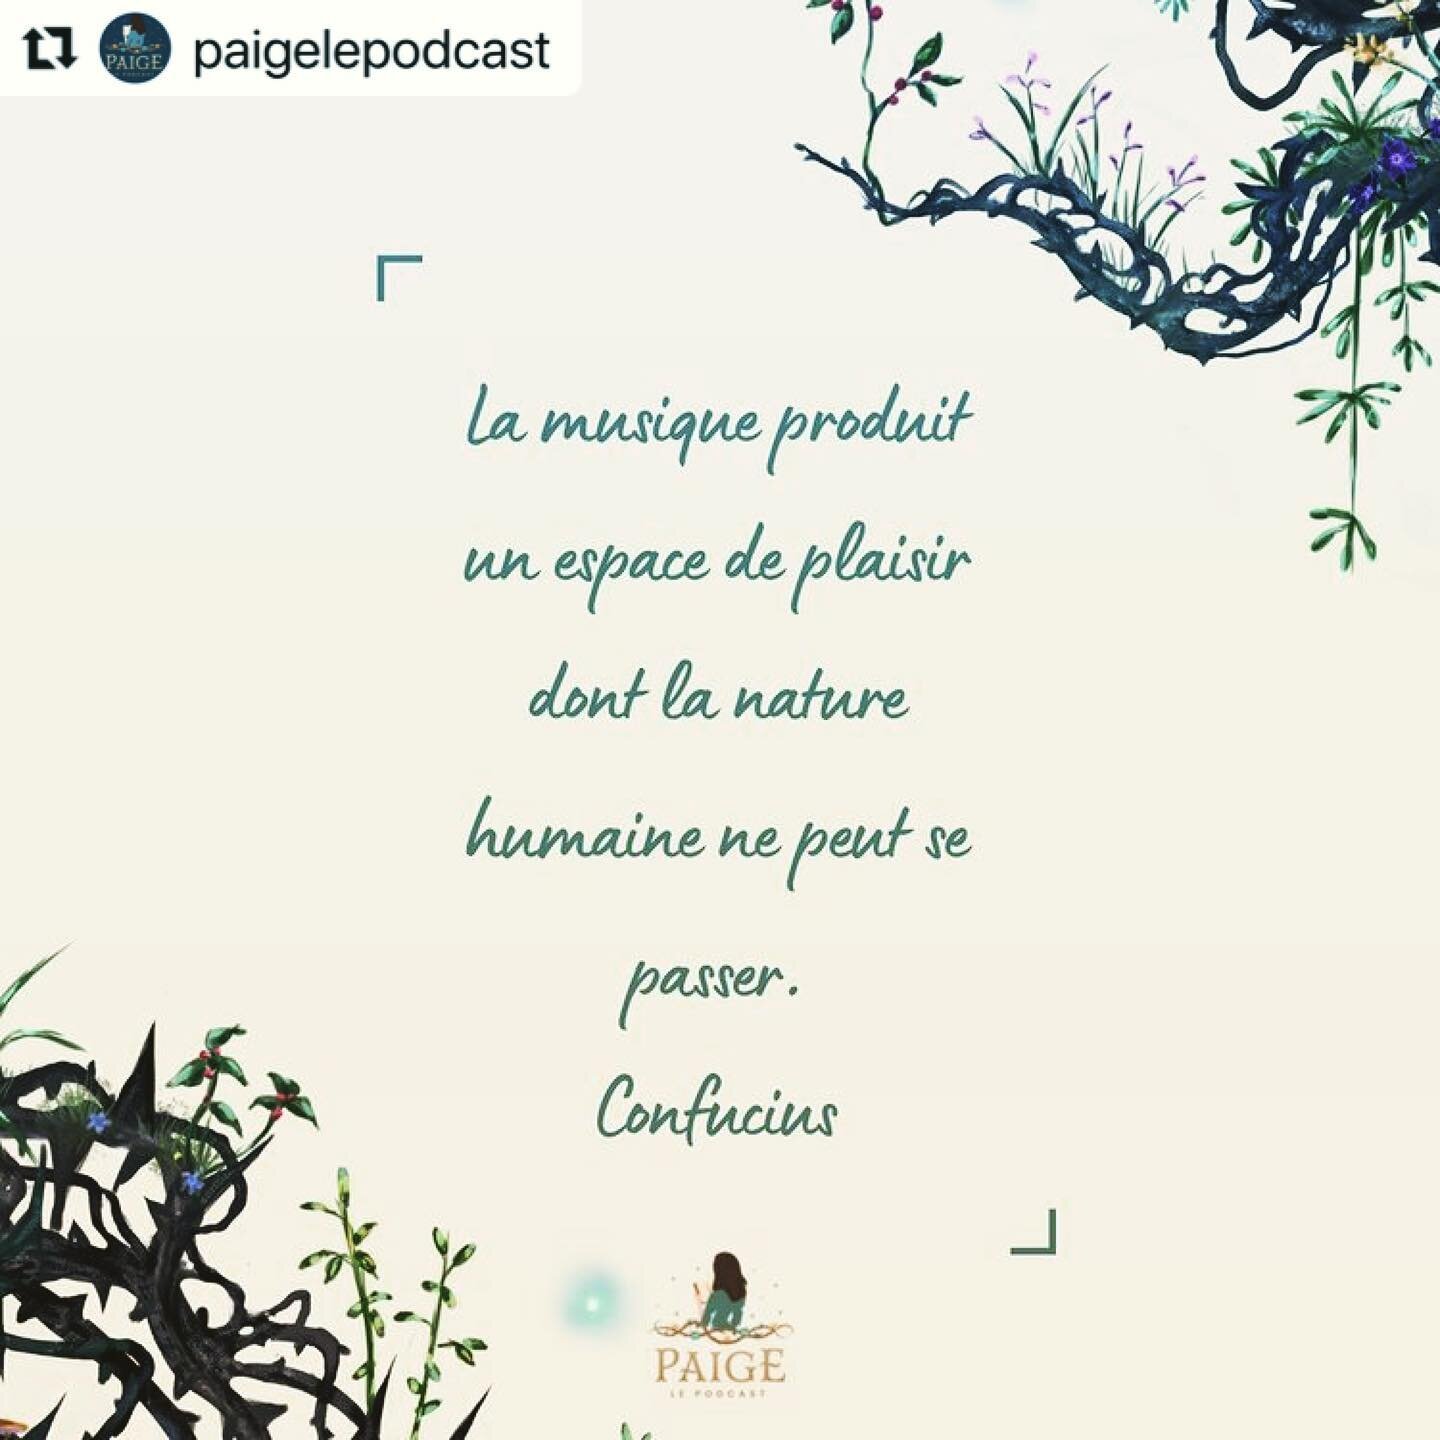 The emotional well-being of cancer patients has a substantial impact on their ability to heal, and music can play a crucial role in this process.

・・・
&quot;La musique produit un espace de plaisir dont la nature humaine ne peut se passer.&quot; Confu